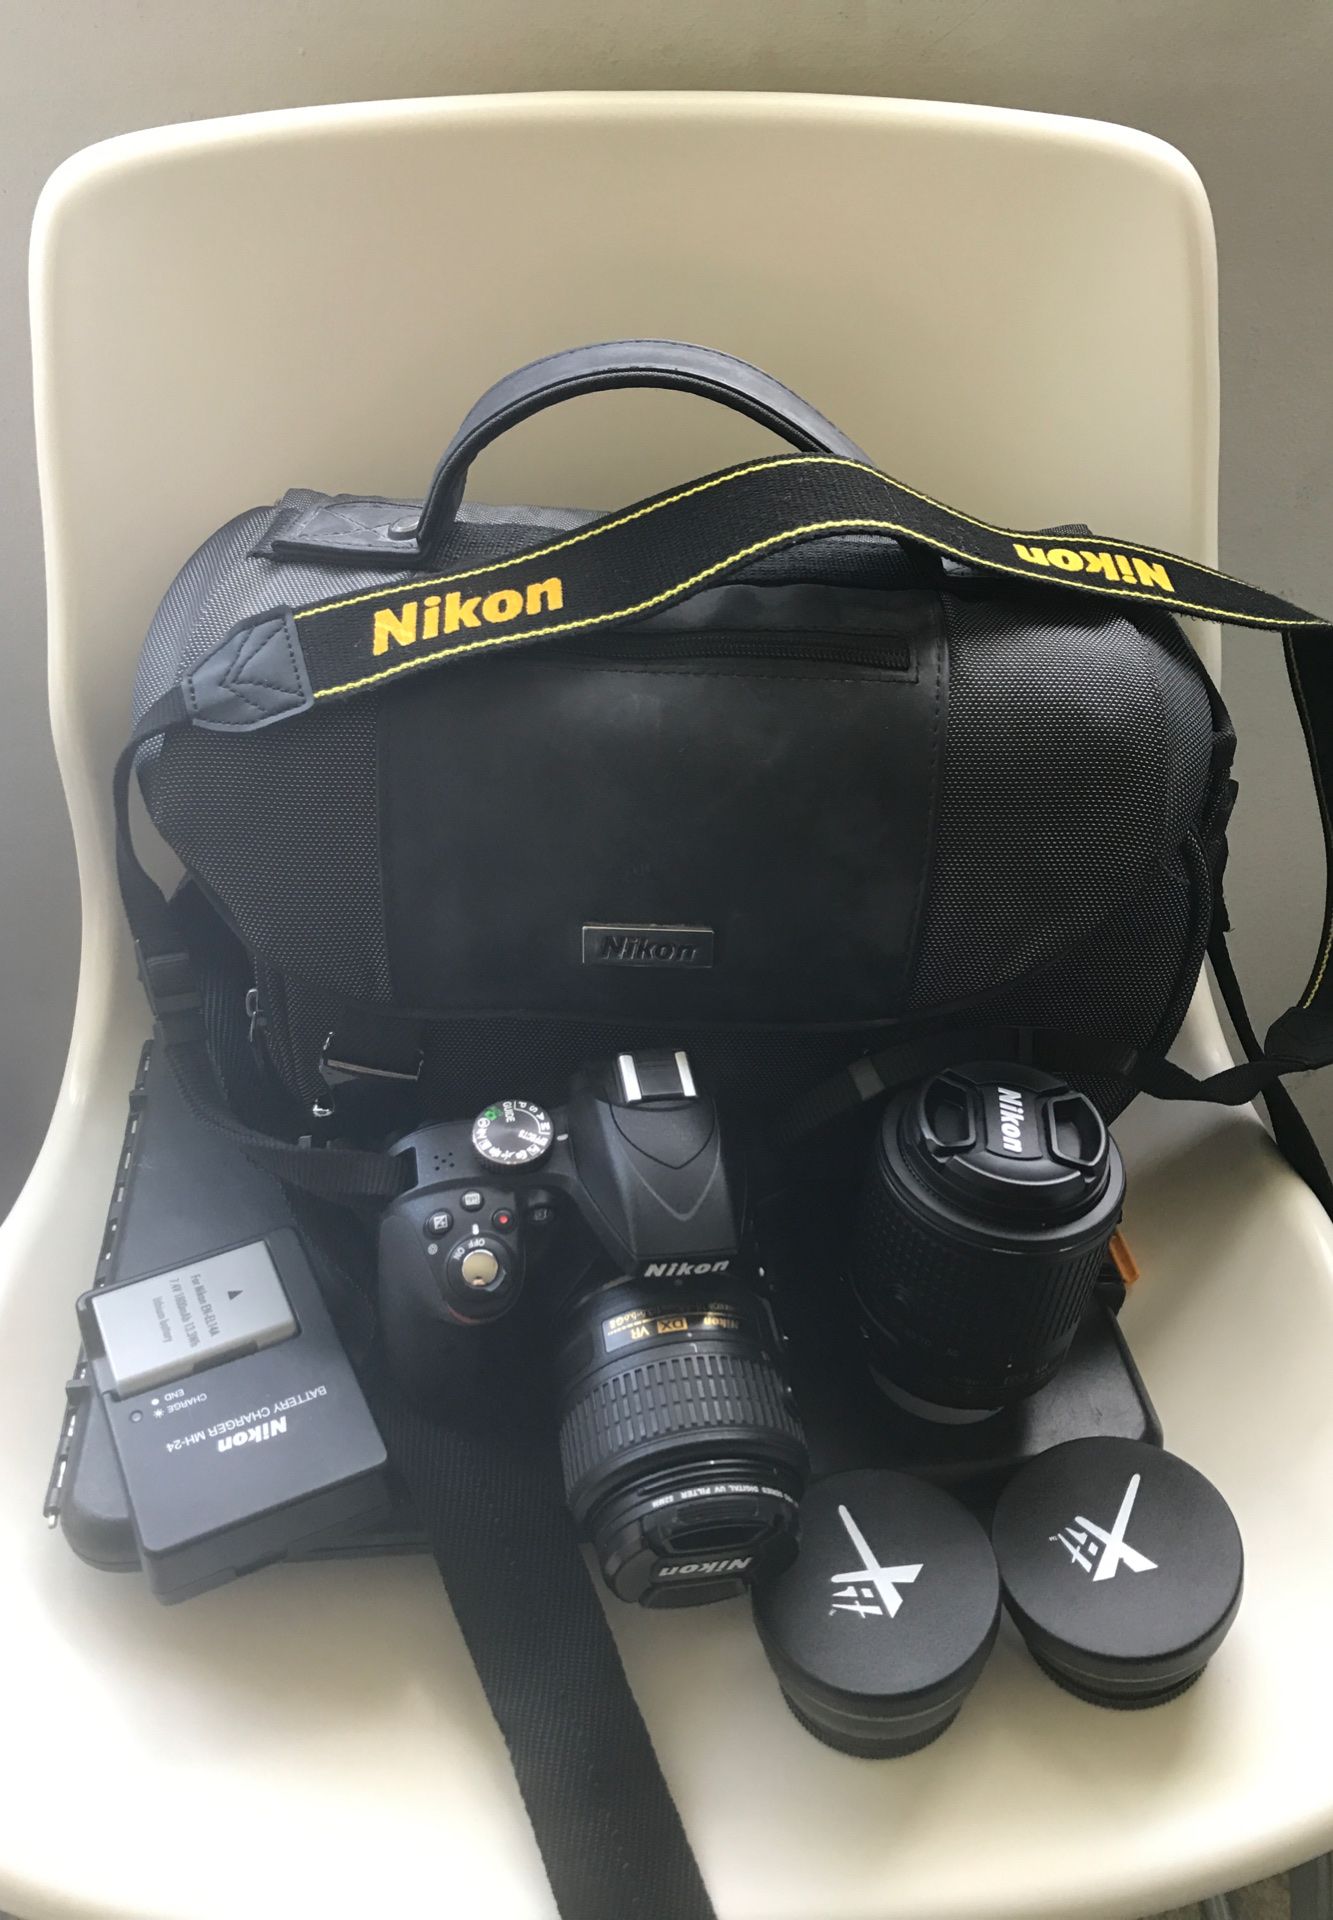 Nikon DD3300. With 4 lenses and charger,two battery, and original carry bag. Asking price $500.00.